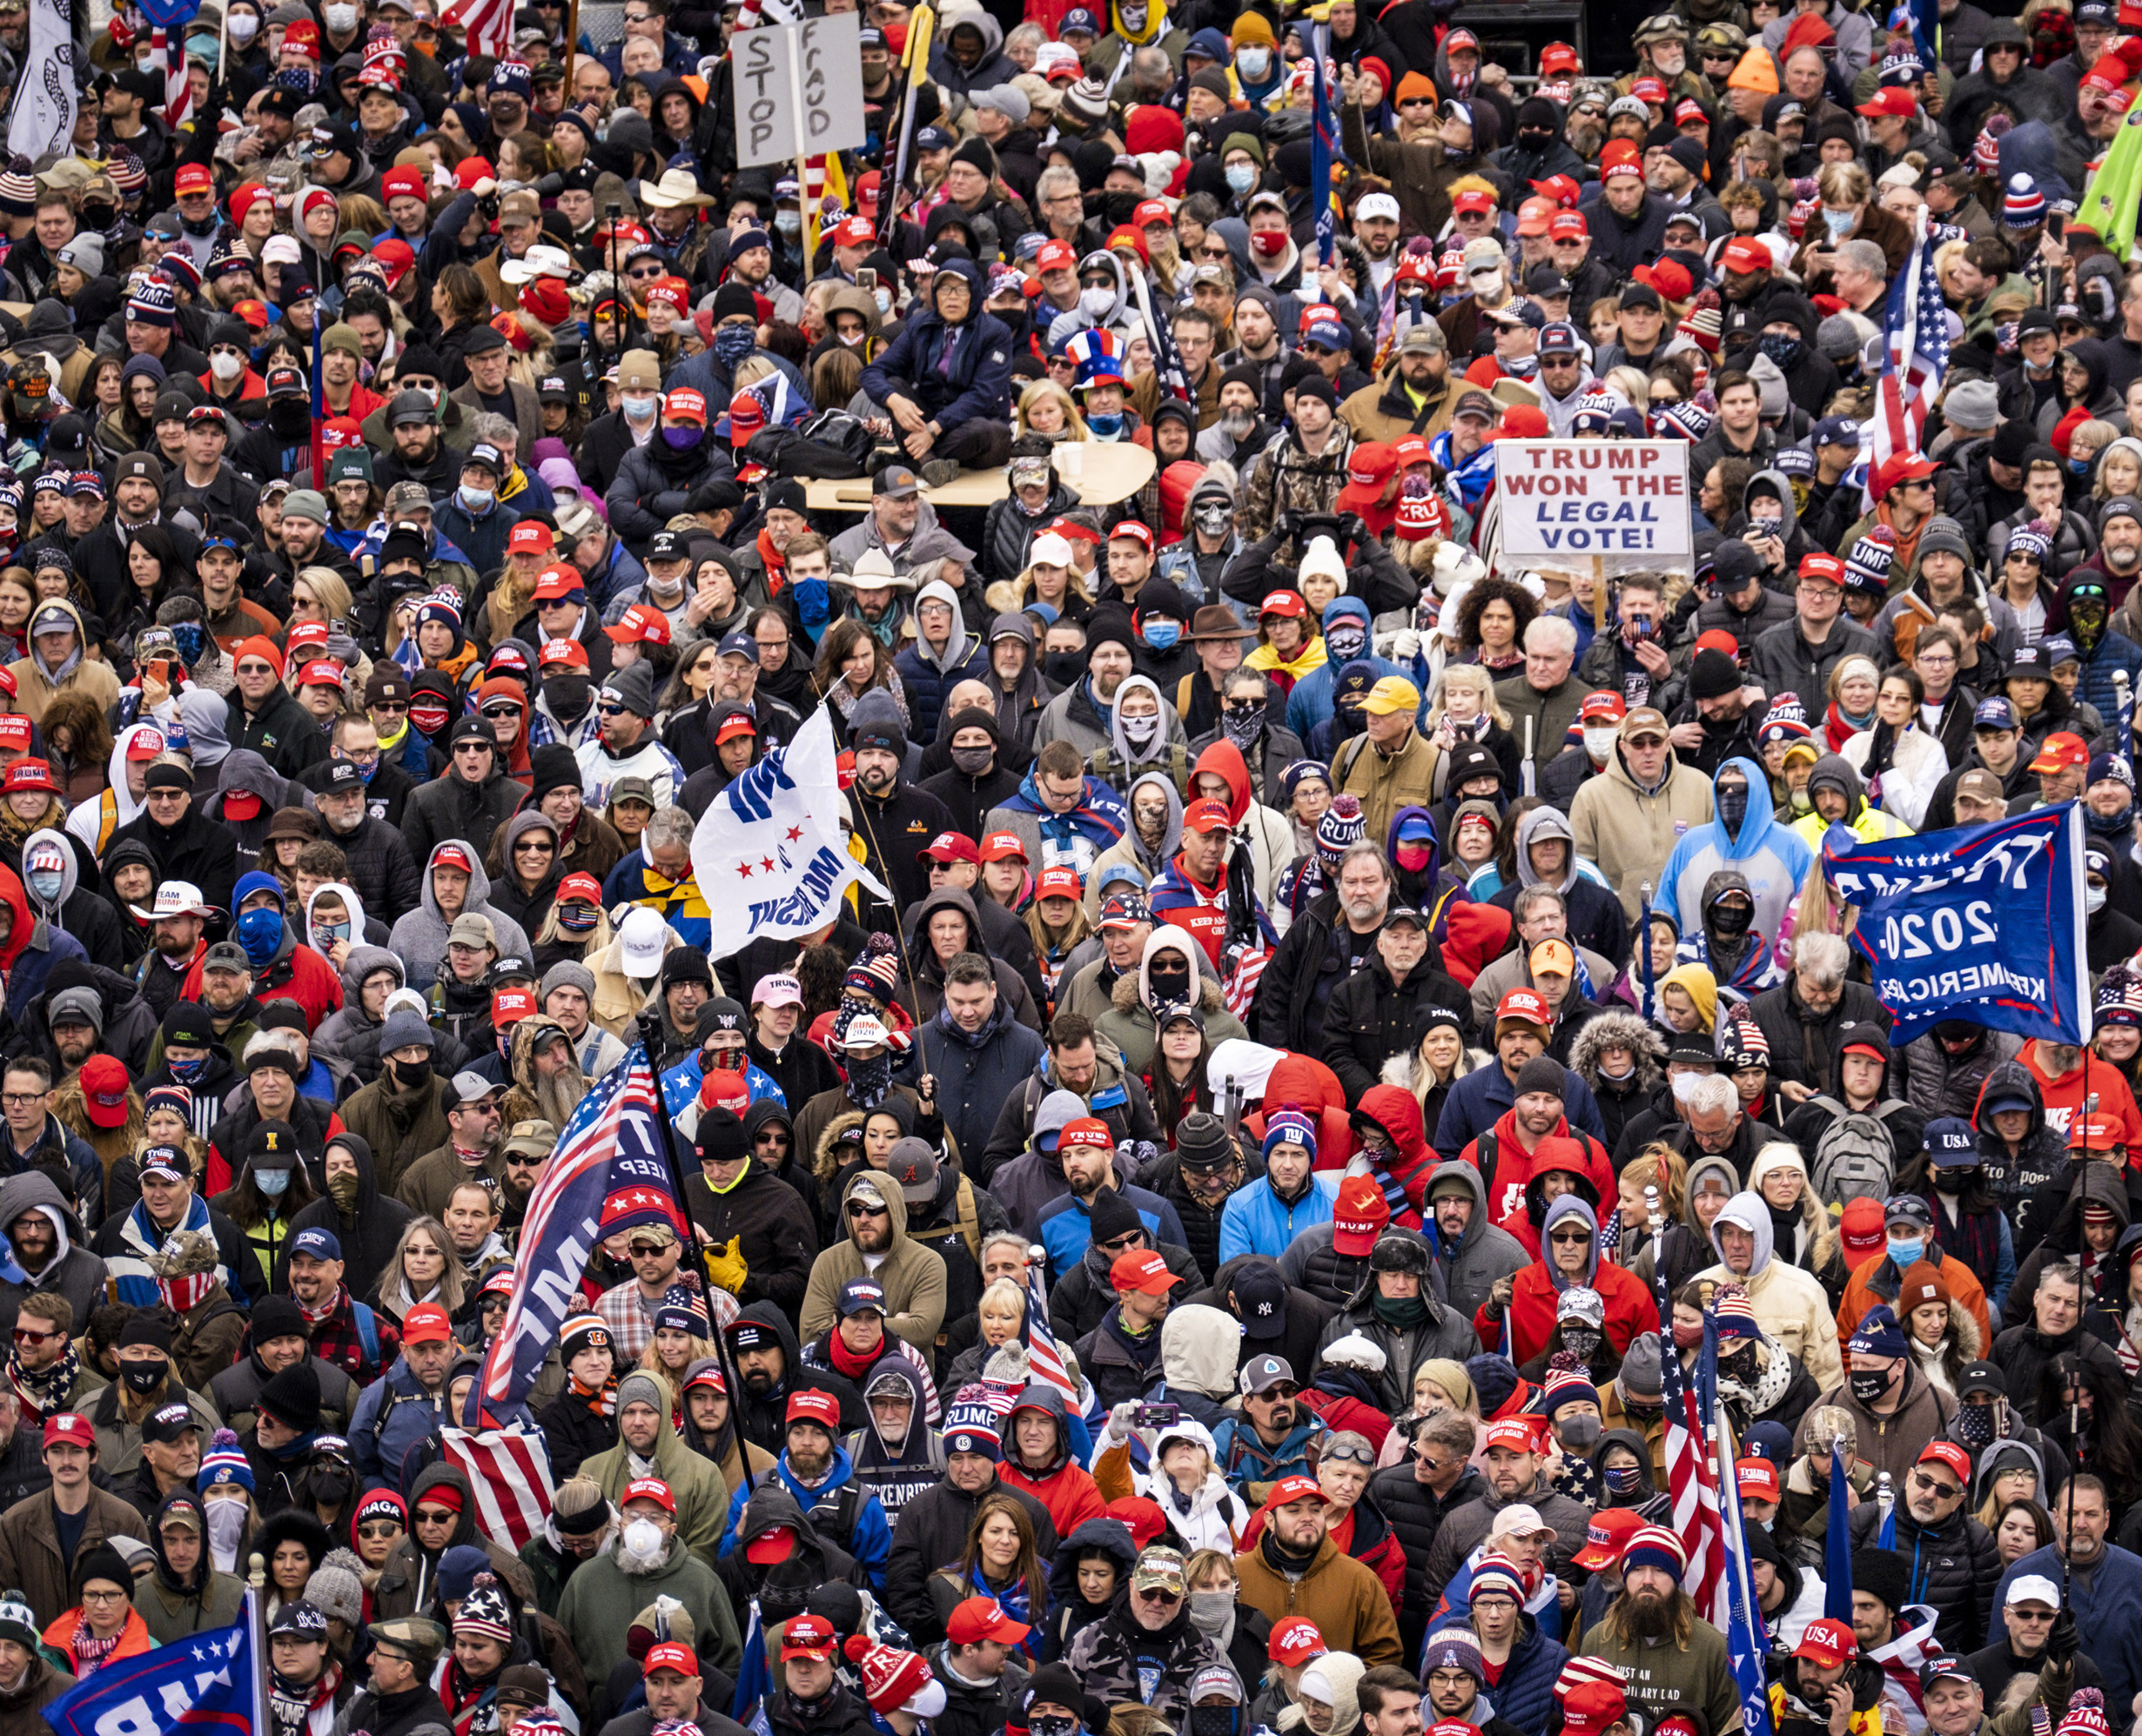 PHOTO: Supporters of President Donald Trump rally in Washington in the hours before the Capitol was invaded by a mob, on Jan. 6, 2021.